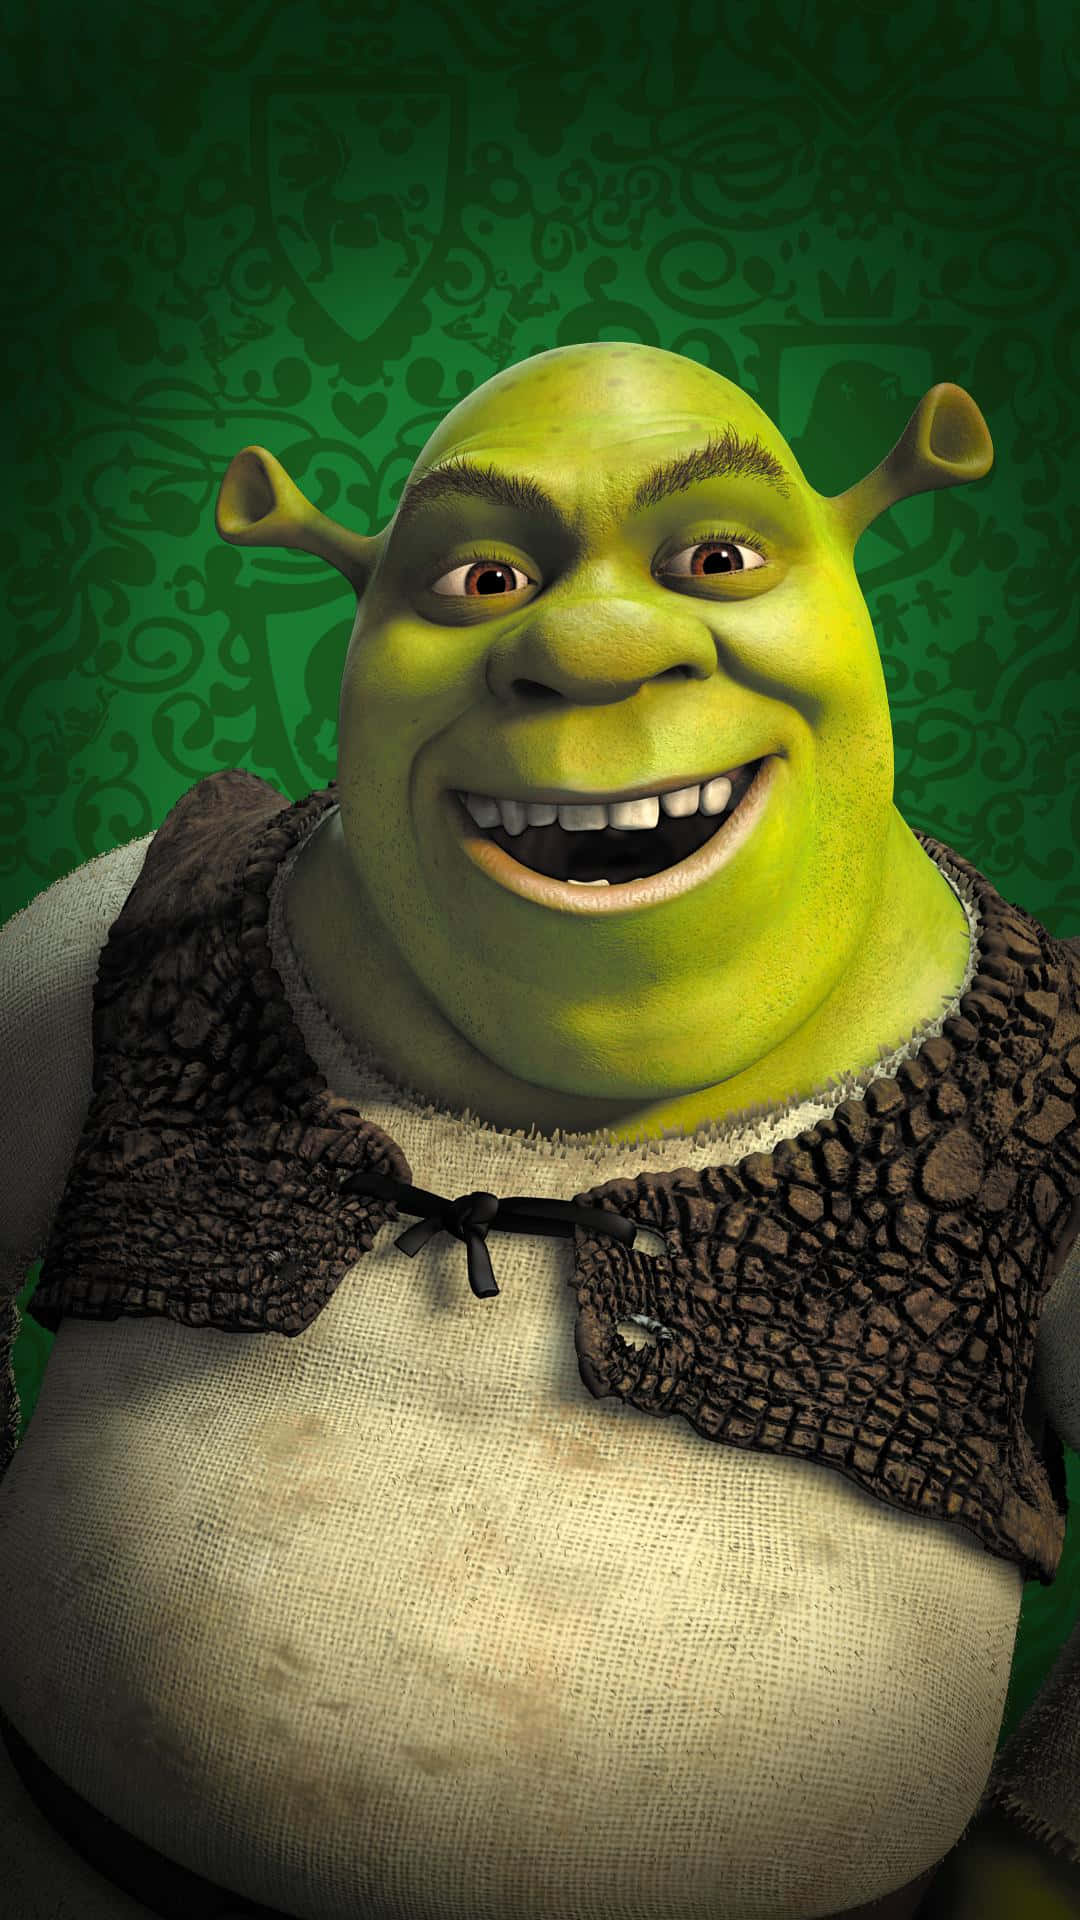 Get Lost in an Enchanted Fairy-tale World With Shrek